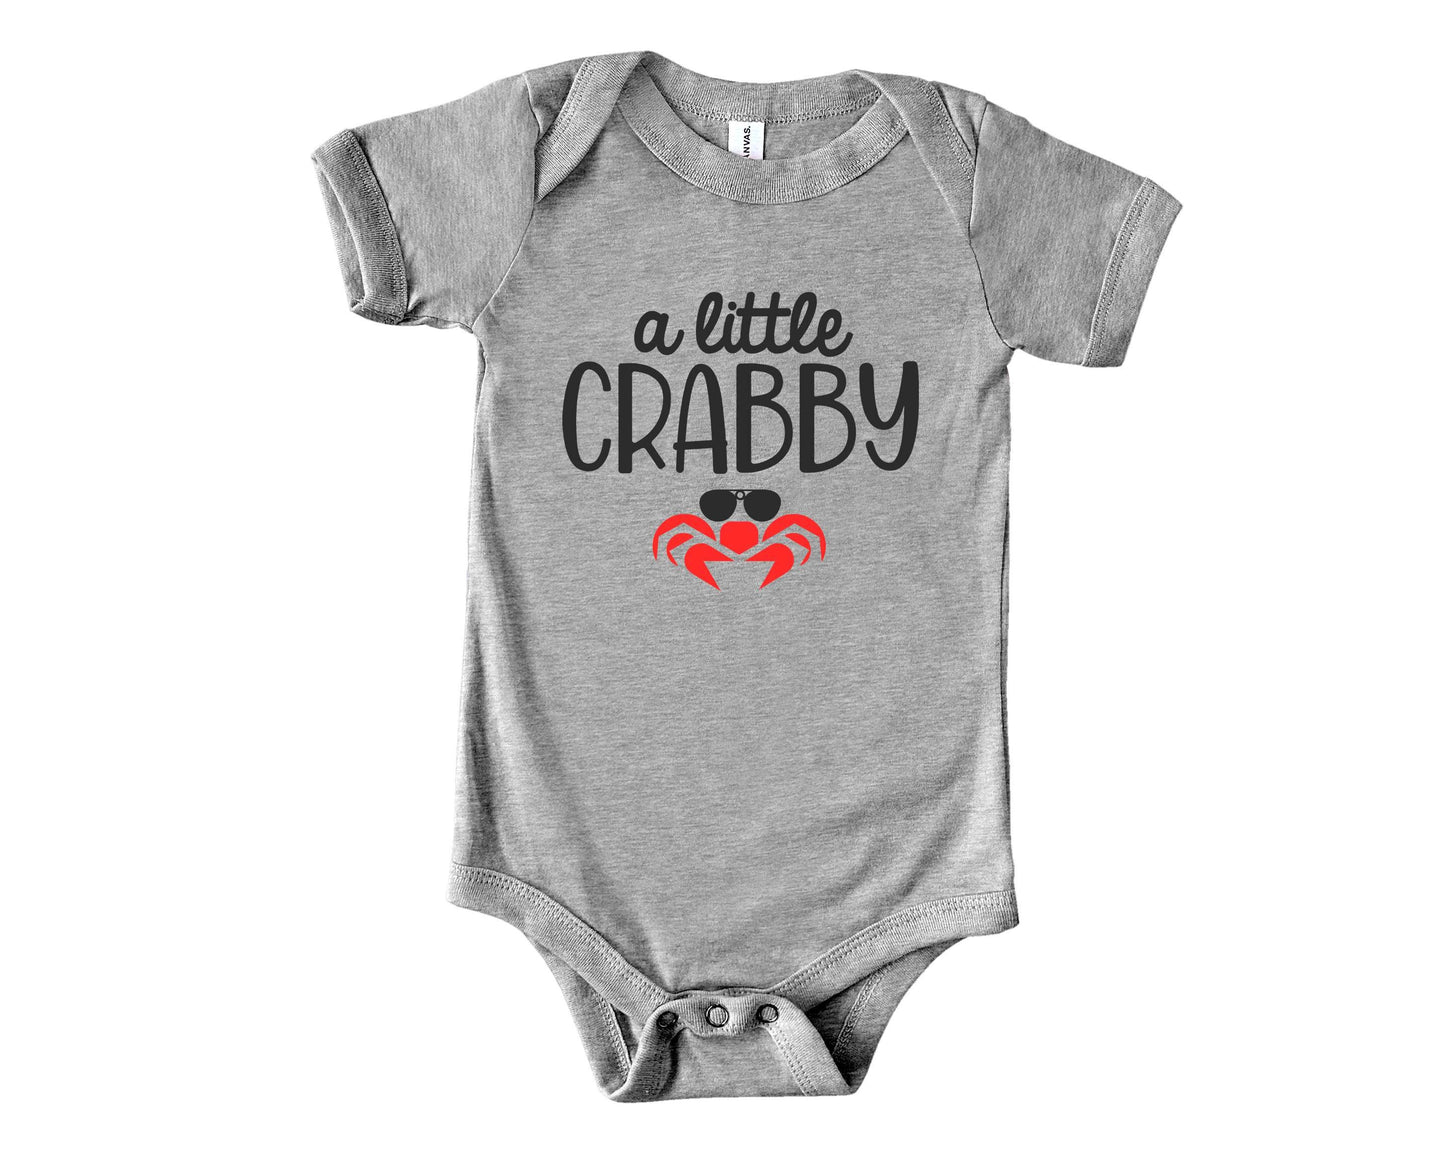 A Little Crabby t-shirt • Baby and Toddler Sizes • Beach Day Shirt • Toddler Boy Shirt • Baby Boy Shirt • Baby Beach Outfit